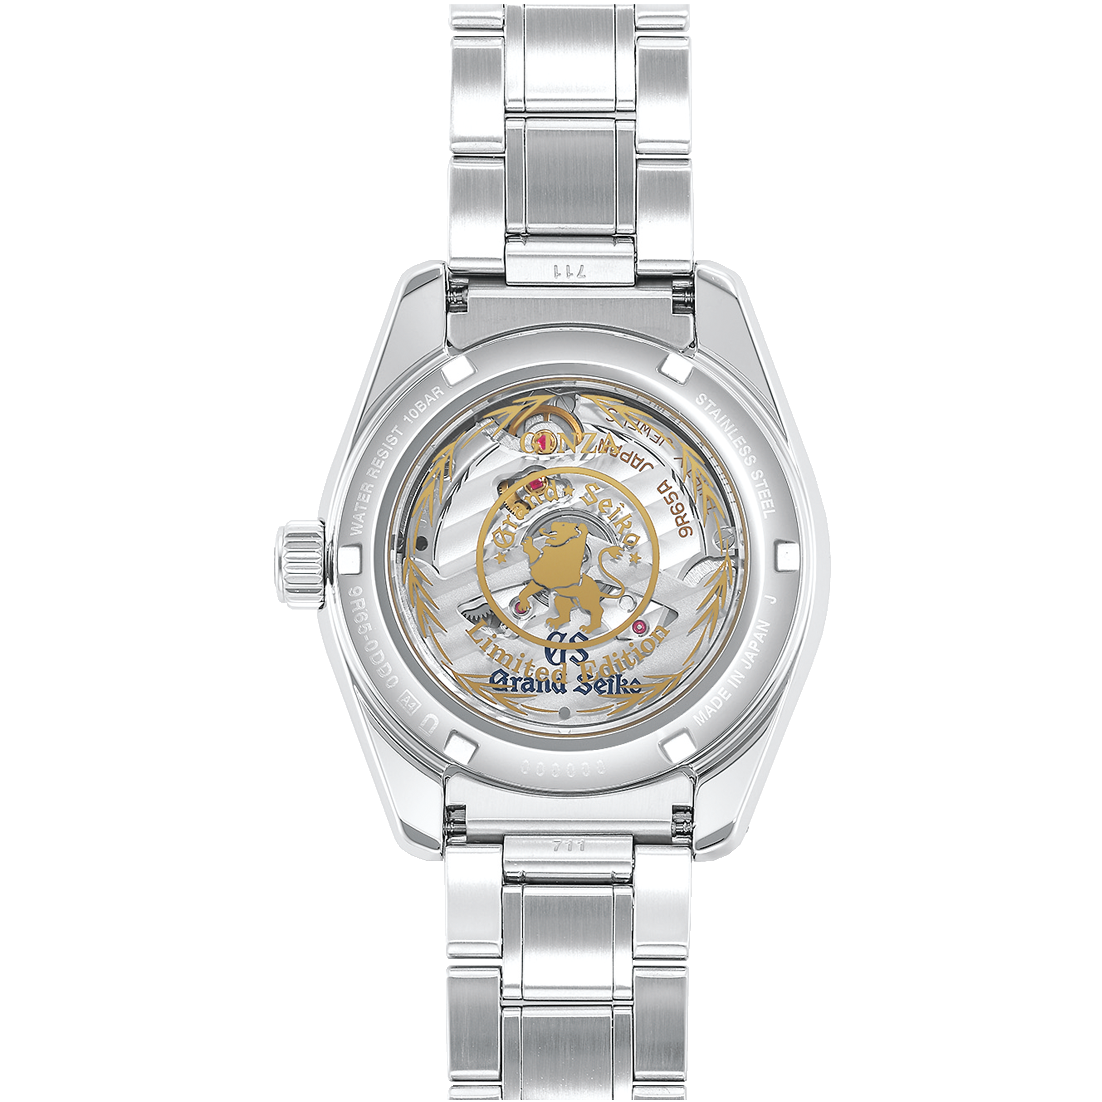 Grand Seiko SBGA409 Heritage Collection Spring Drive Ginza Limited – WATCH  OUTZ